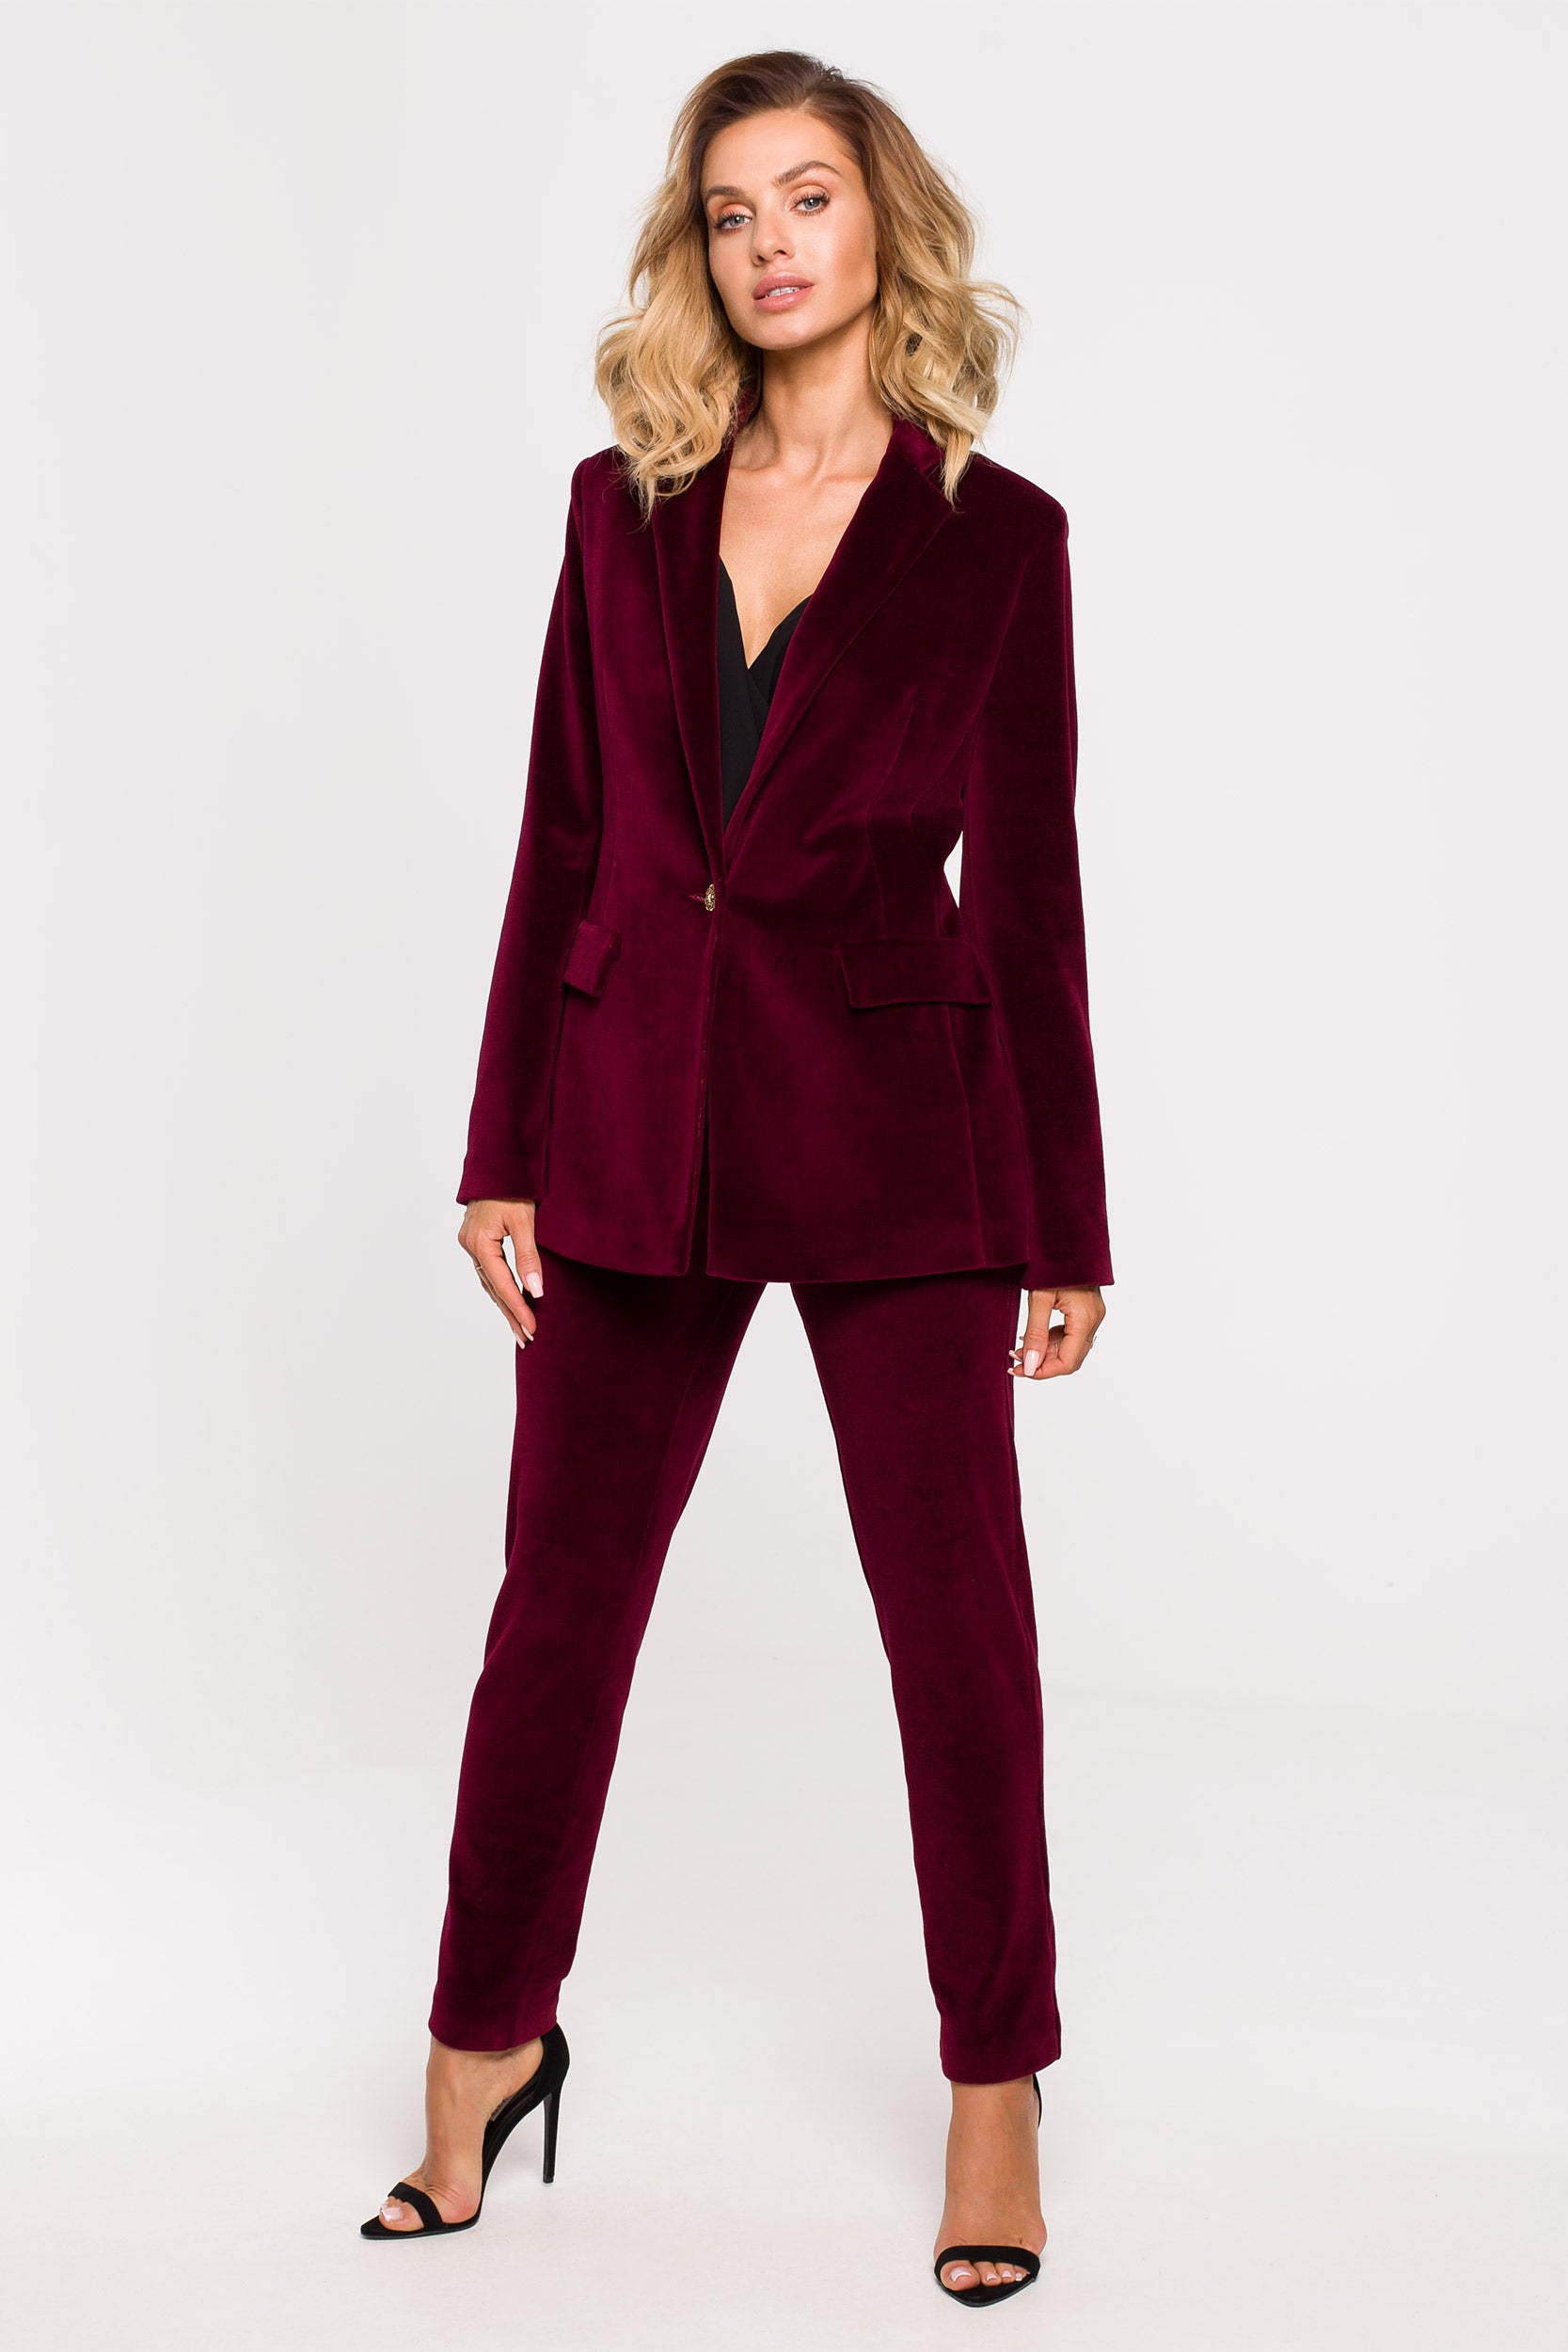 Tom Ford Remakes That Iconic '90s Red Velvet Suit